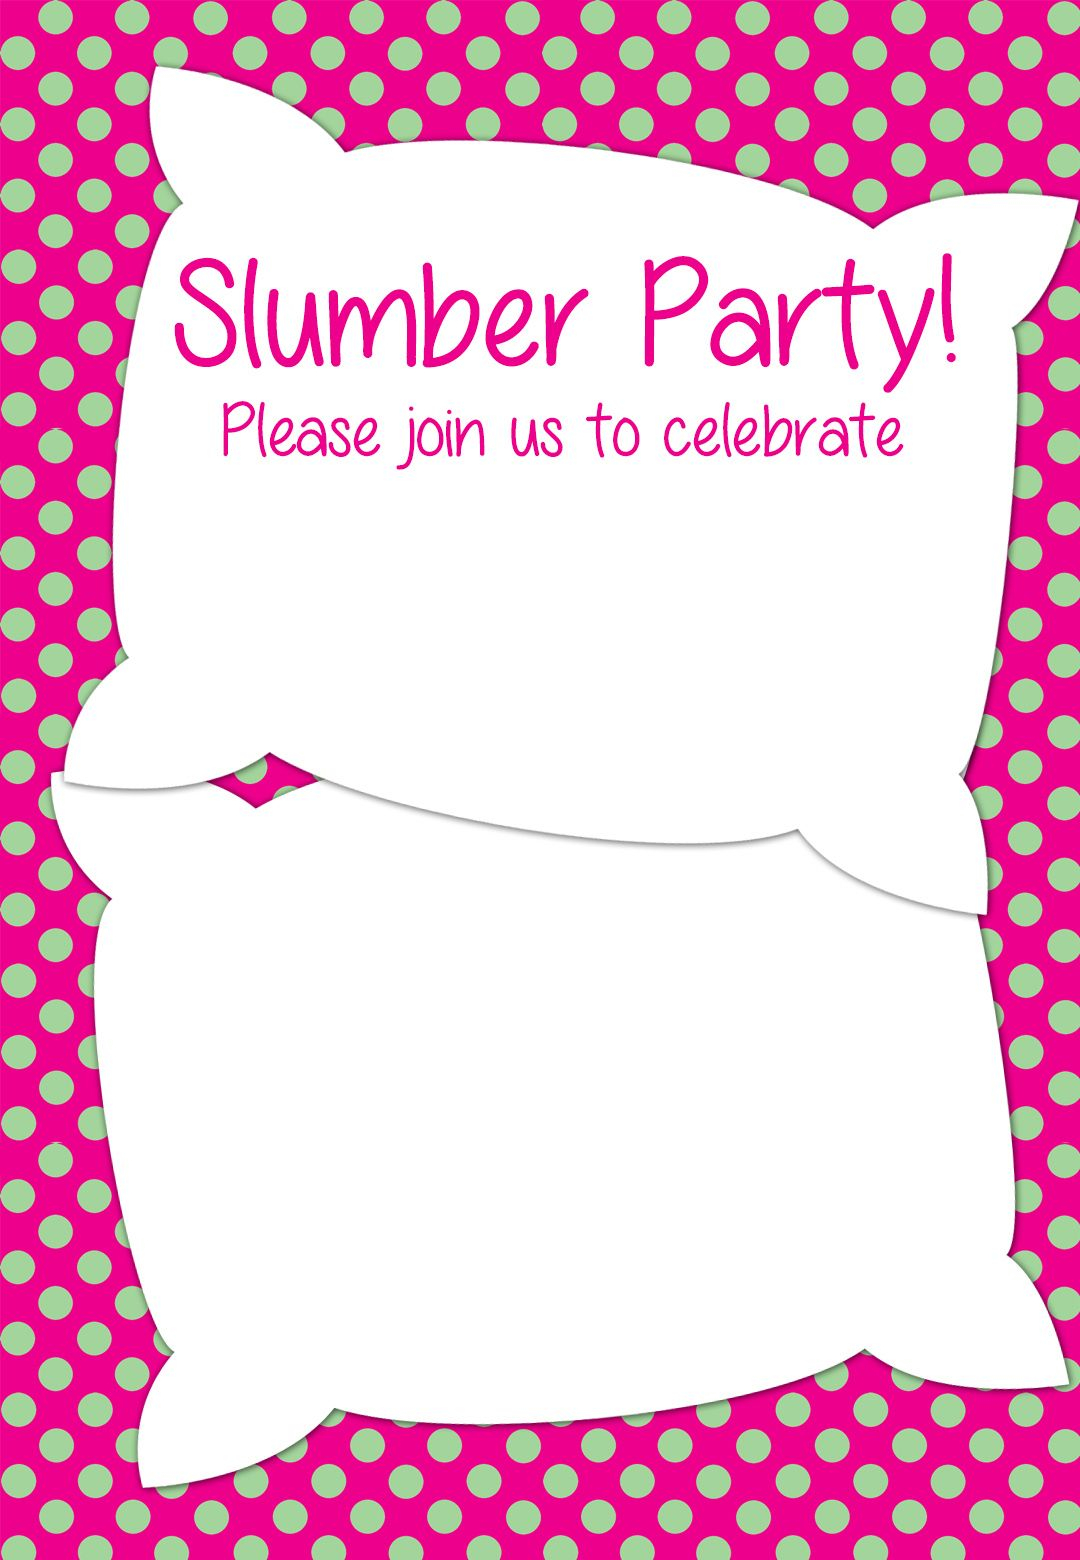 Free Printable Slumber Party Invitation Party Ideas In 2019 throughout proportions 1080 X 1560